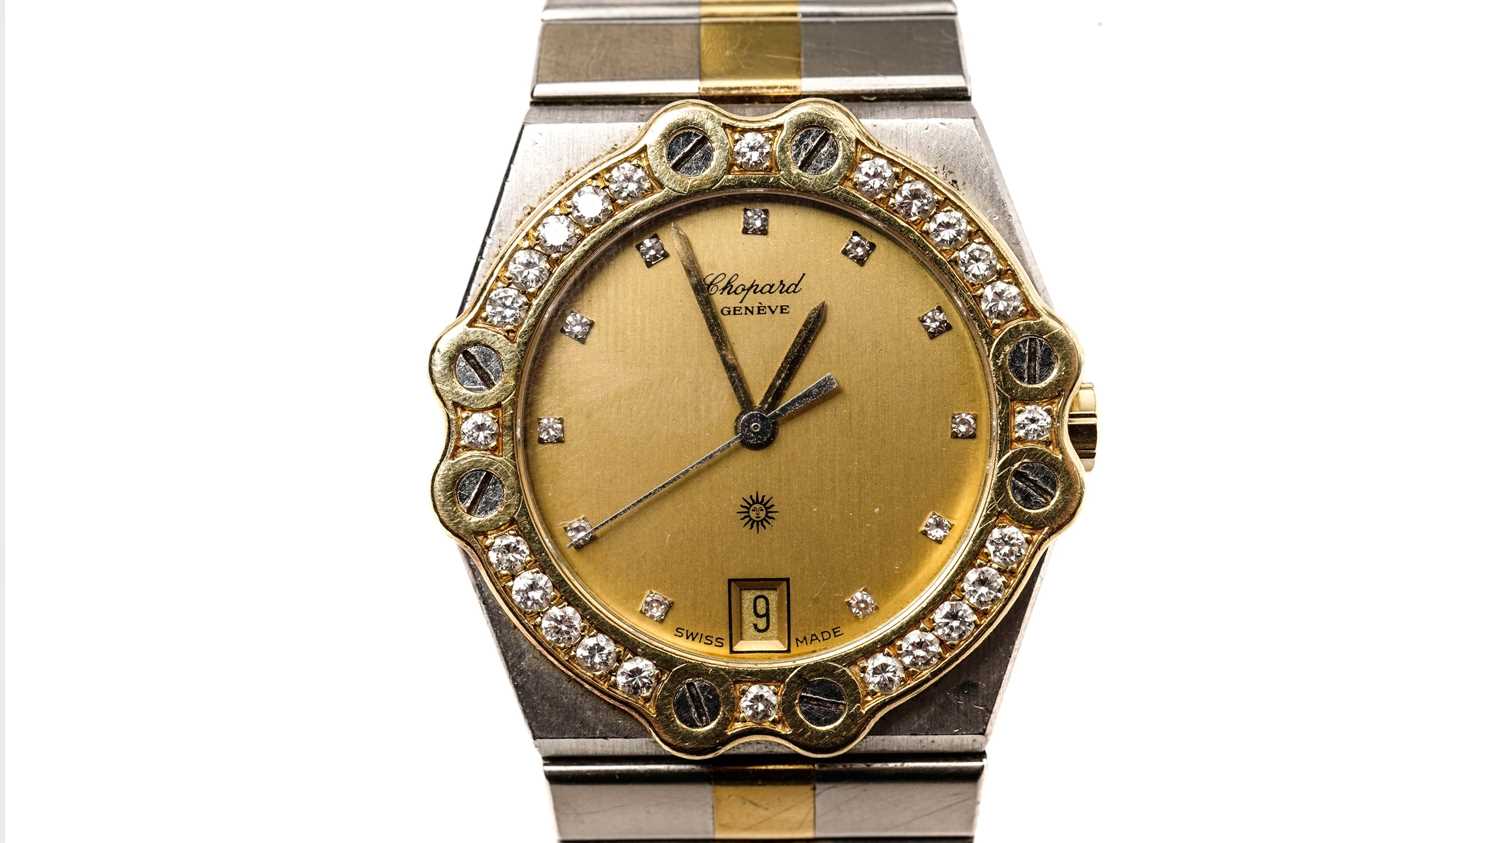 Lot 1059 - Chopard, Geneve, St. Moritz: a steel and 18ct yellow gold wristwatch